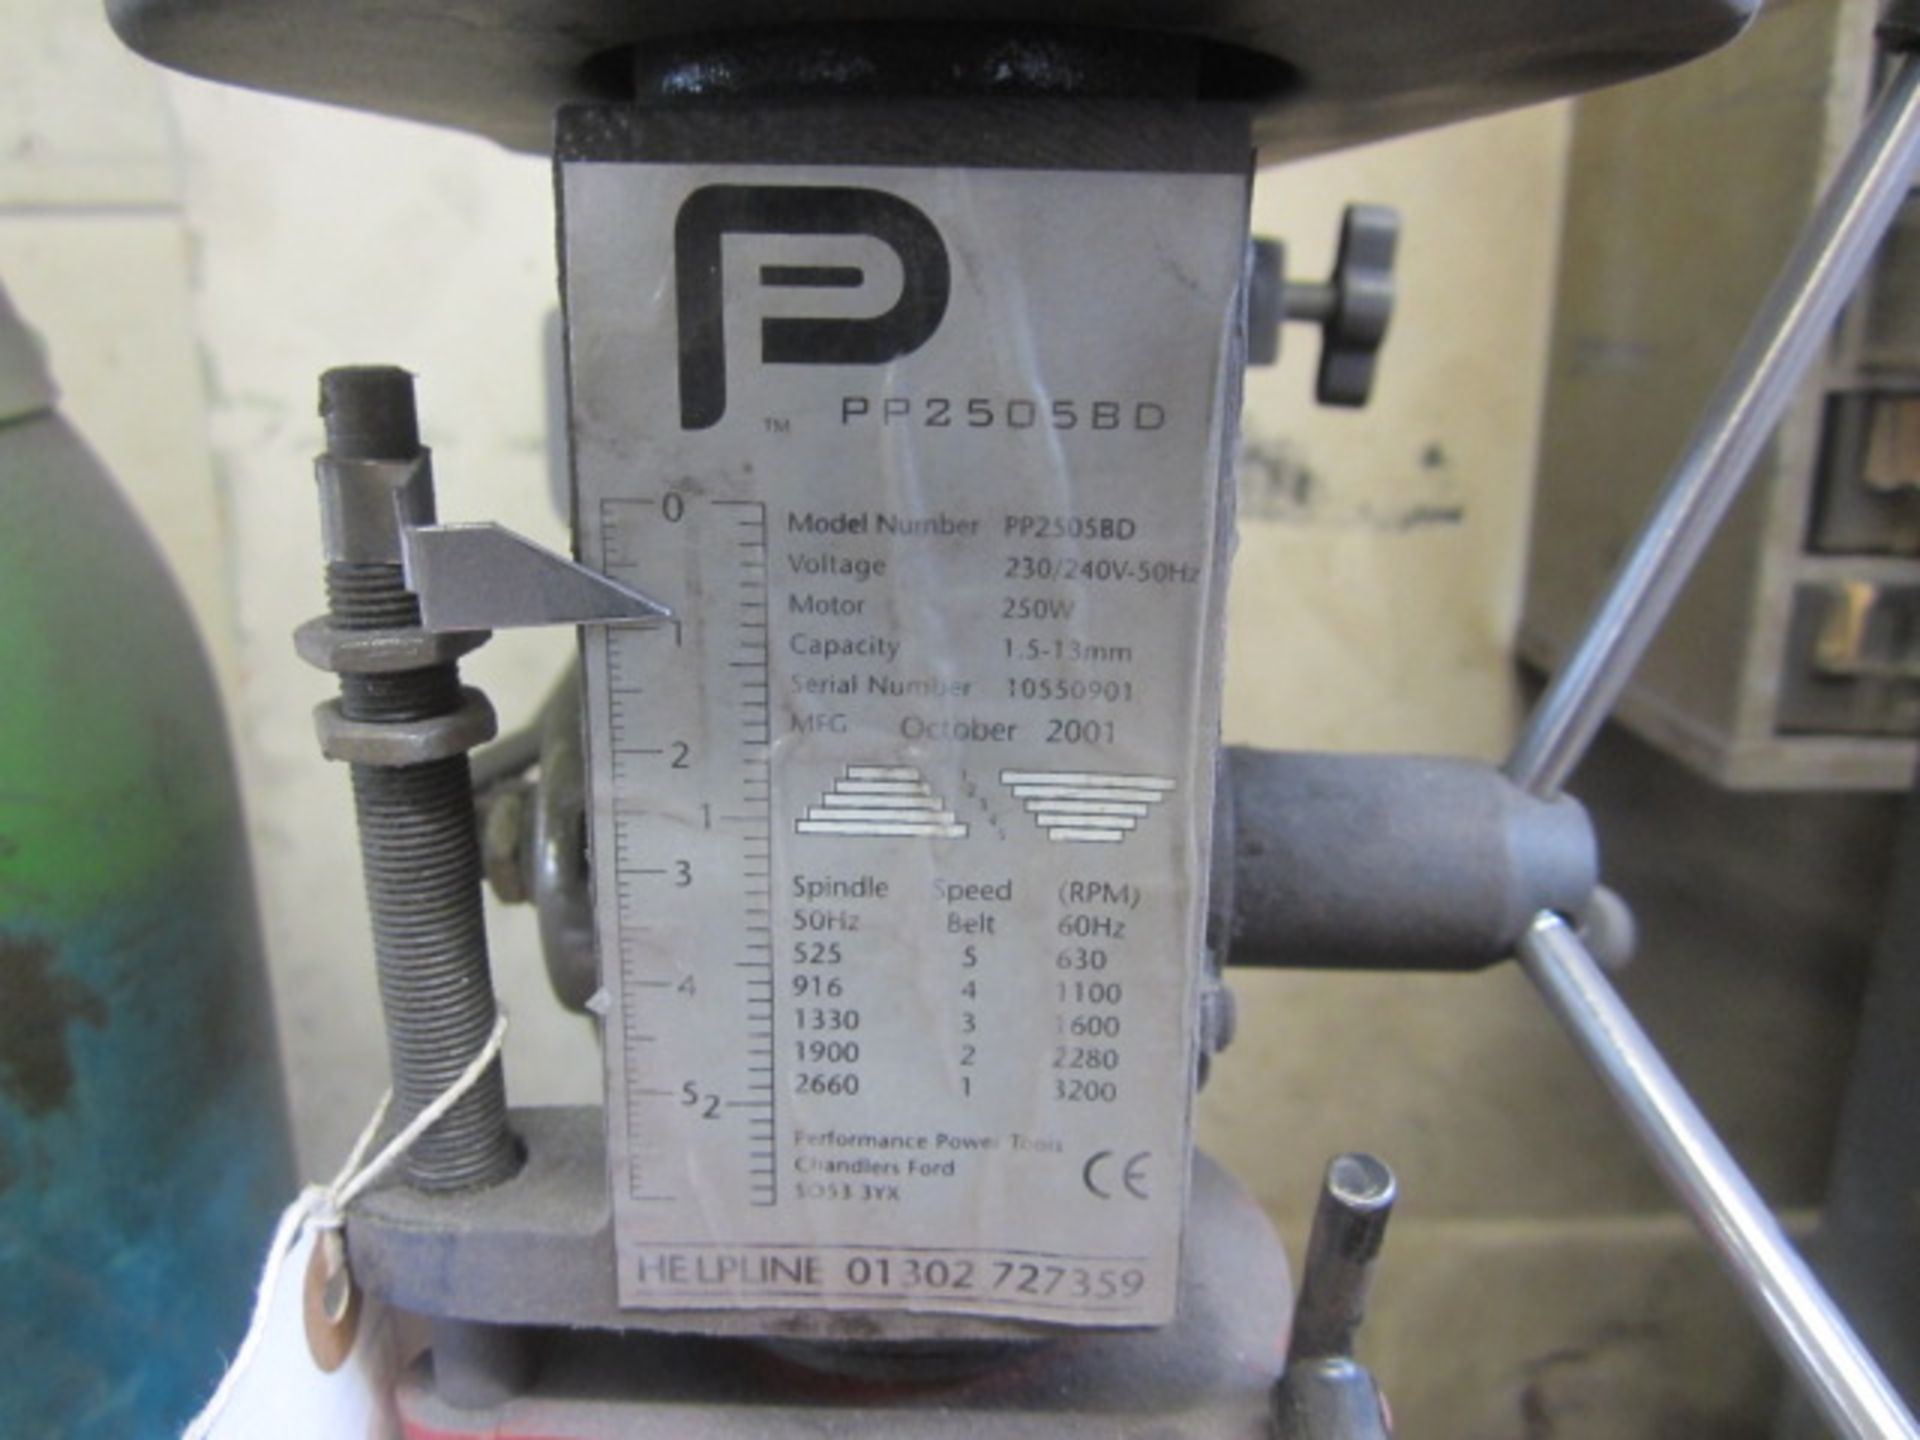 Performance Power PP2505 BD bench top pillar drill, serial no. 10550901 (2001) - Image 3 of 3